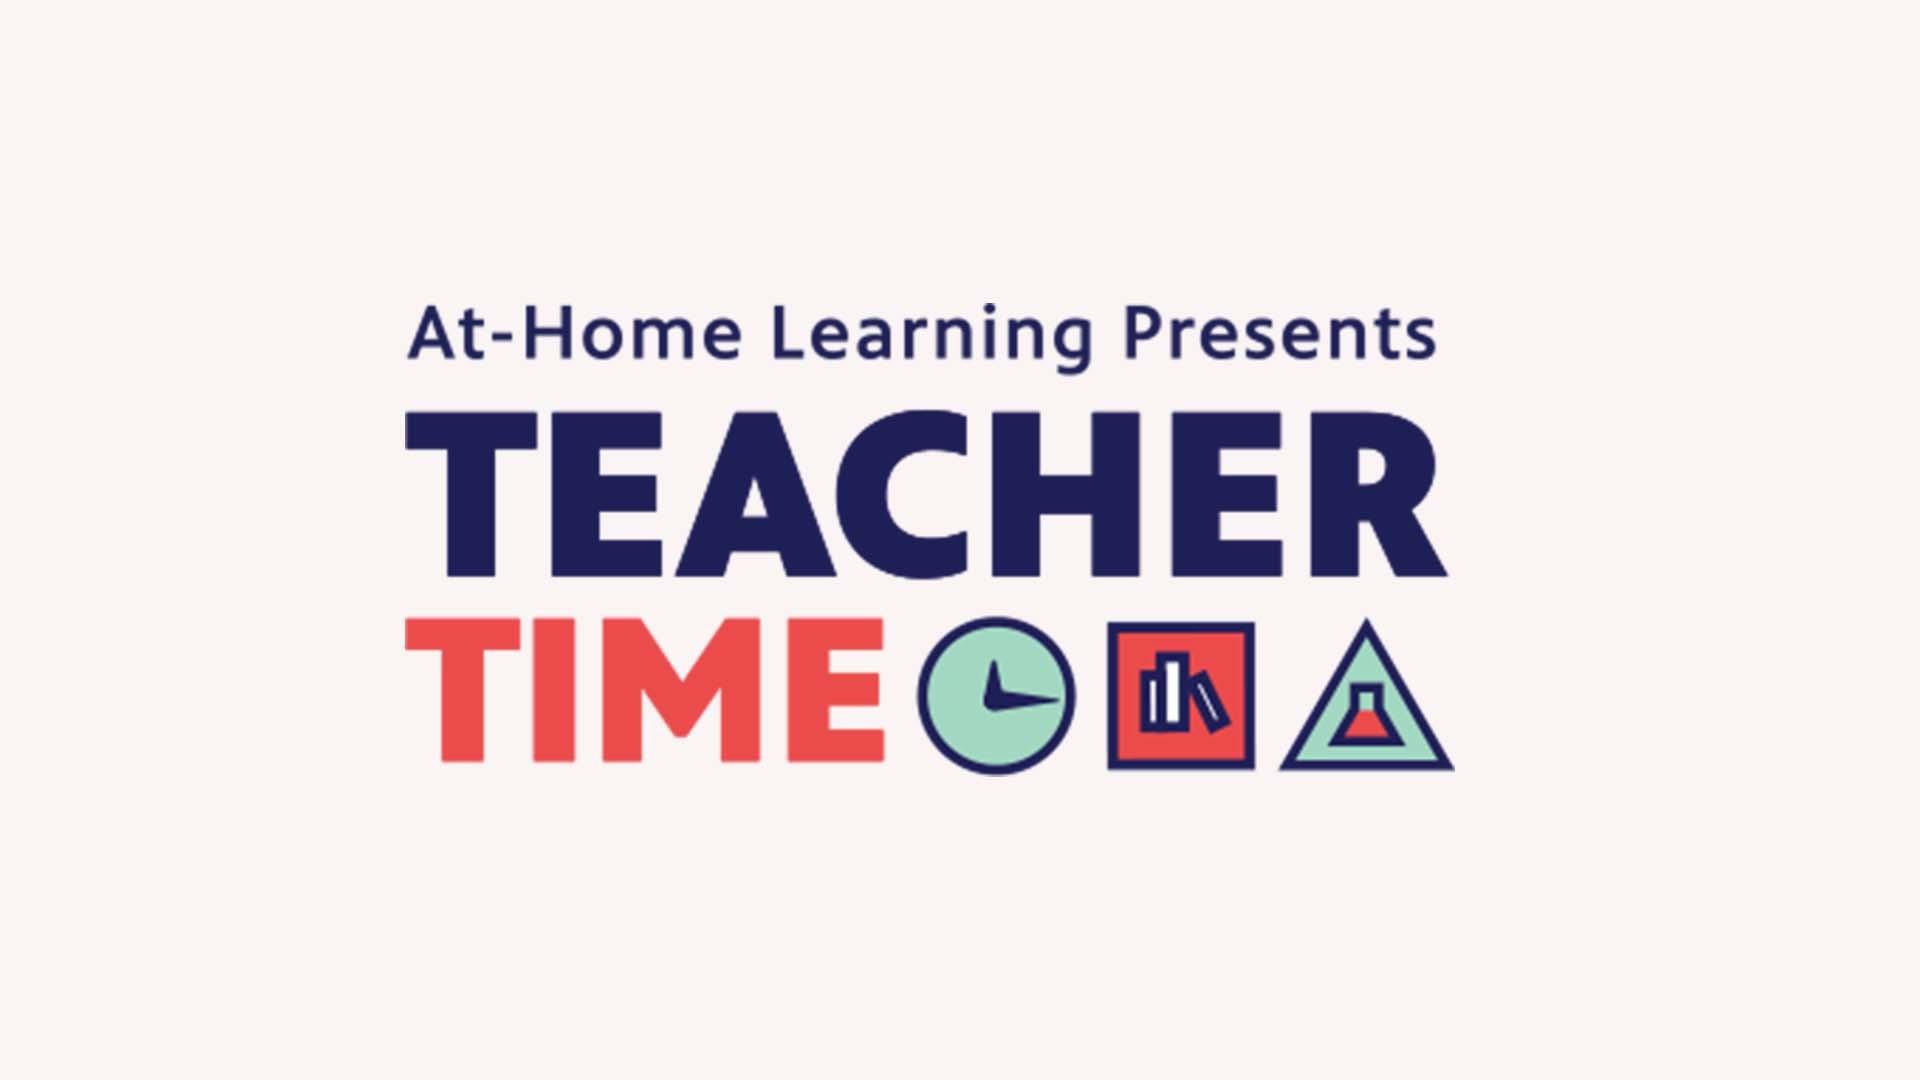 At home learning presents teacher time